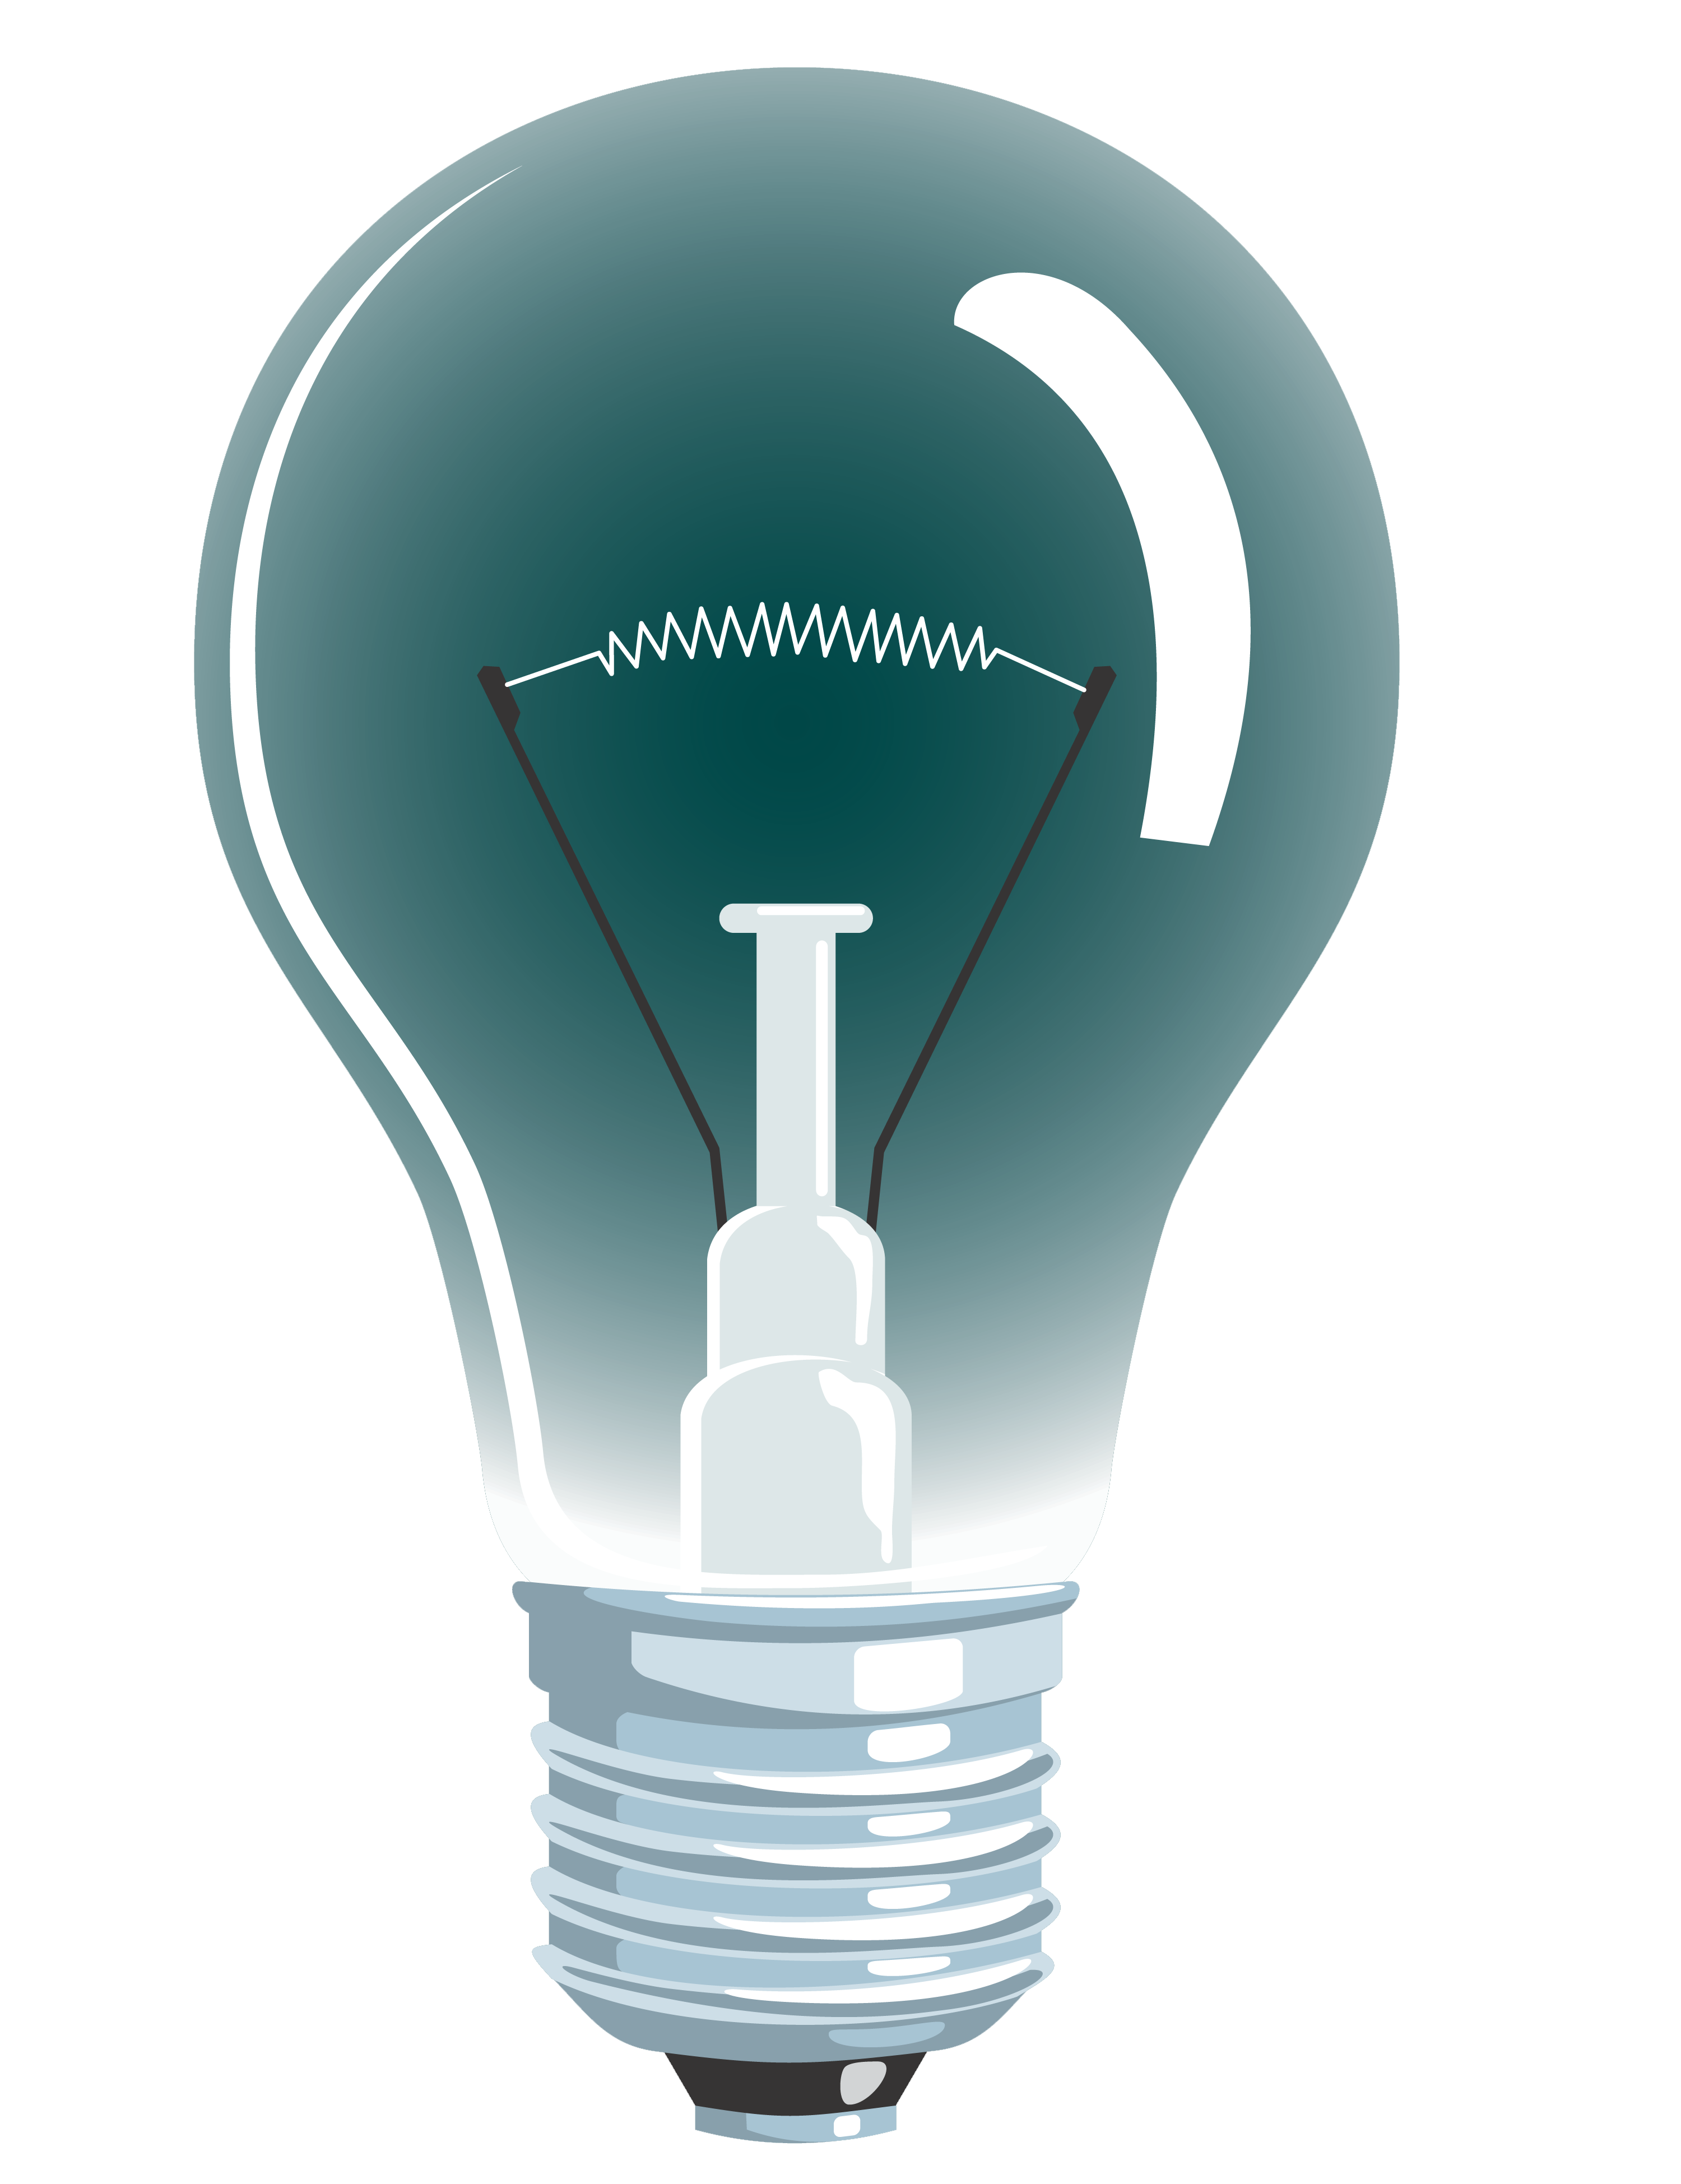 Bulb light PNG image, free picture download